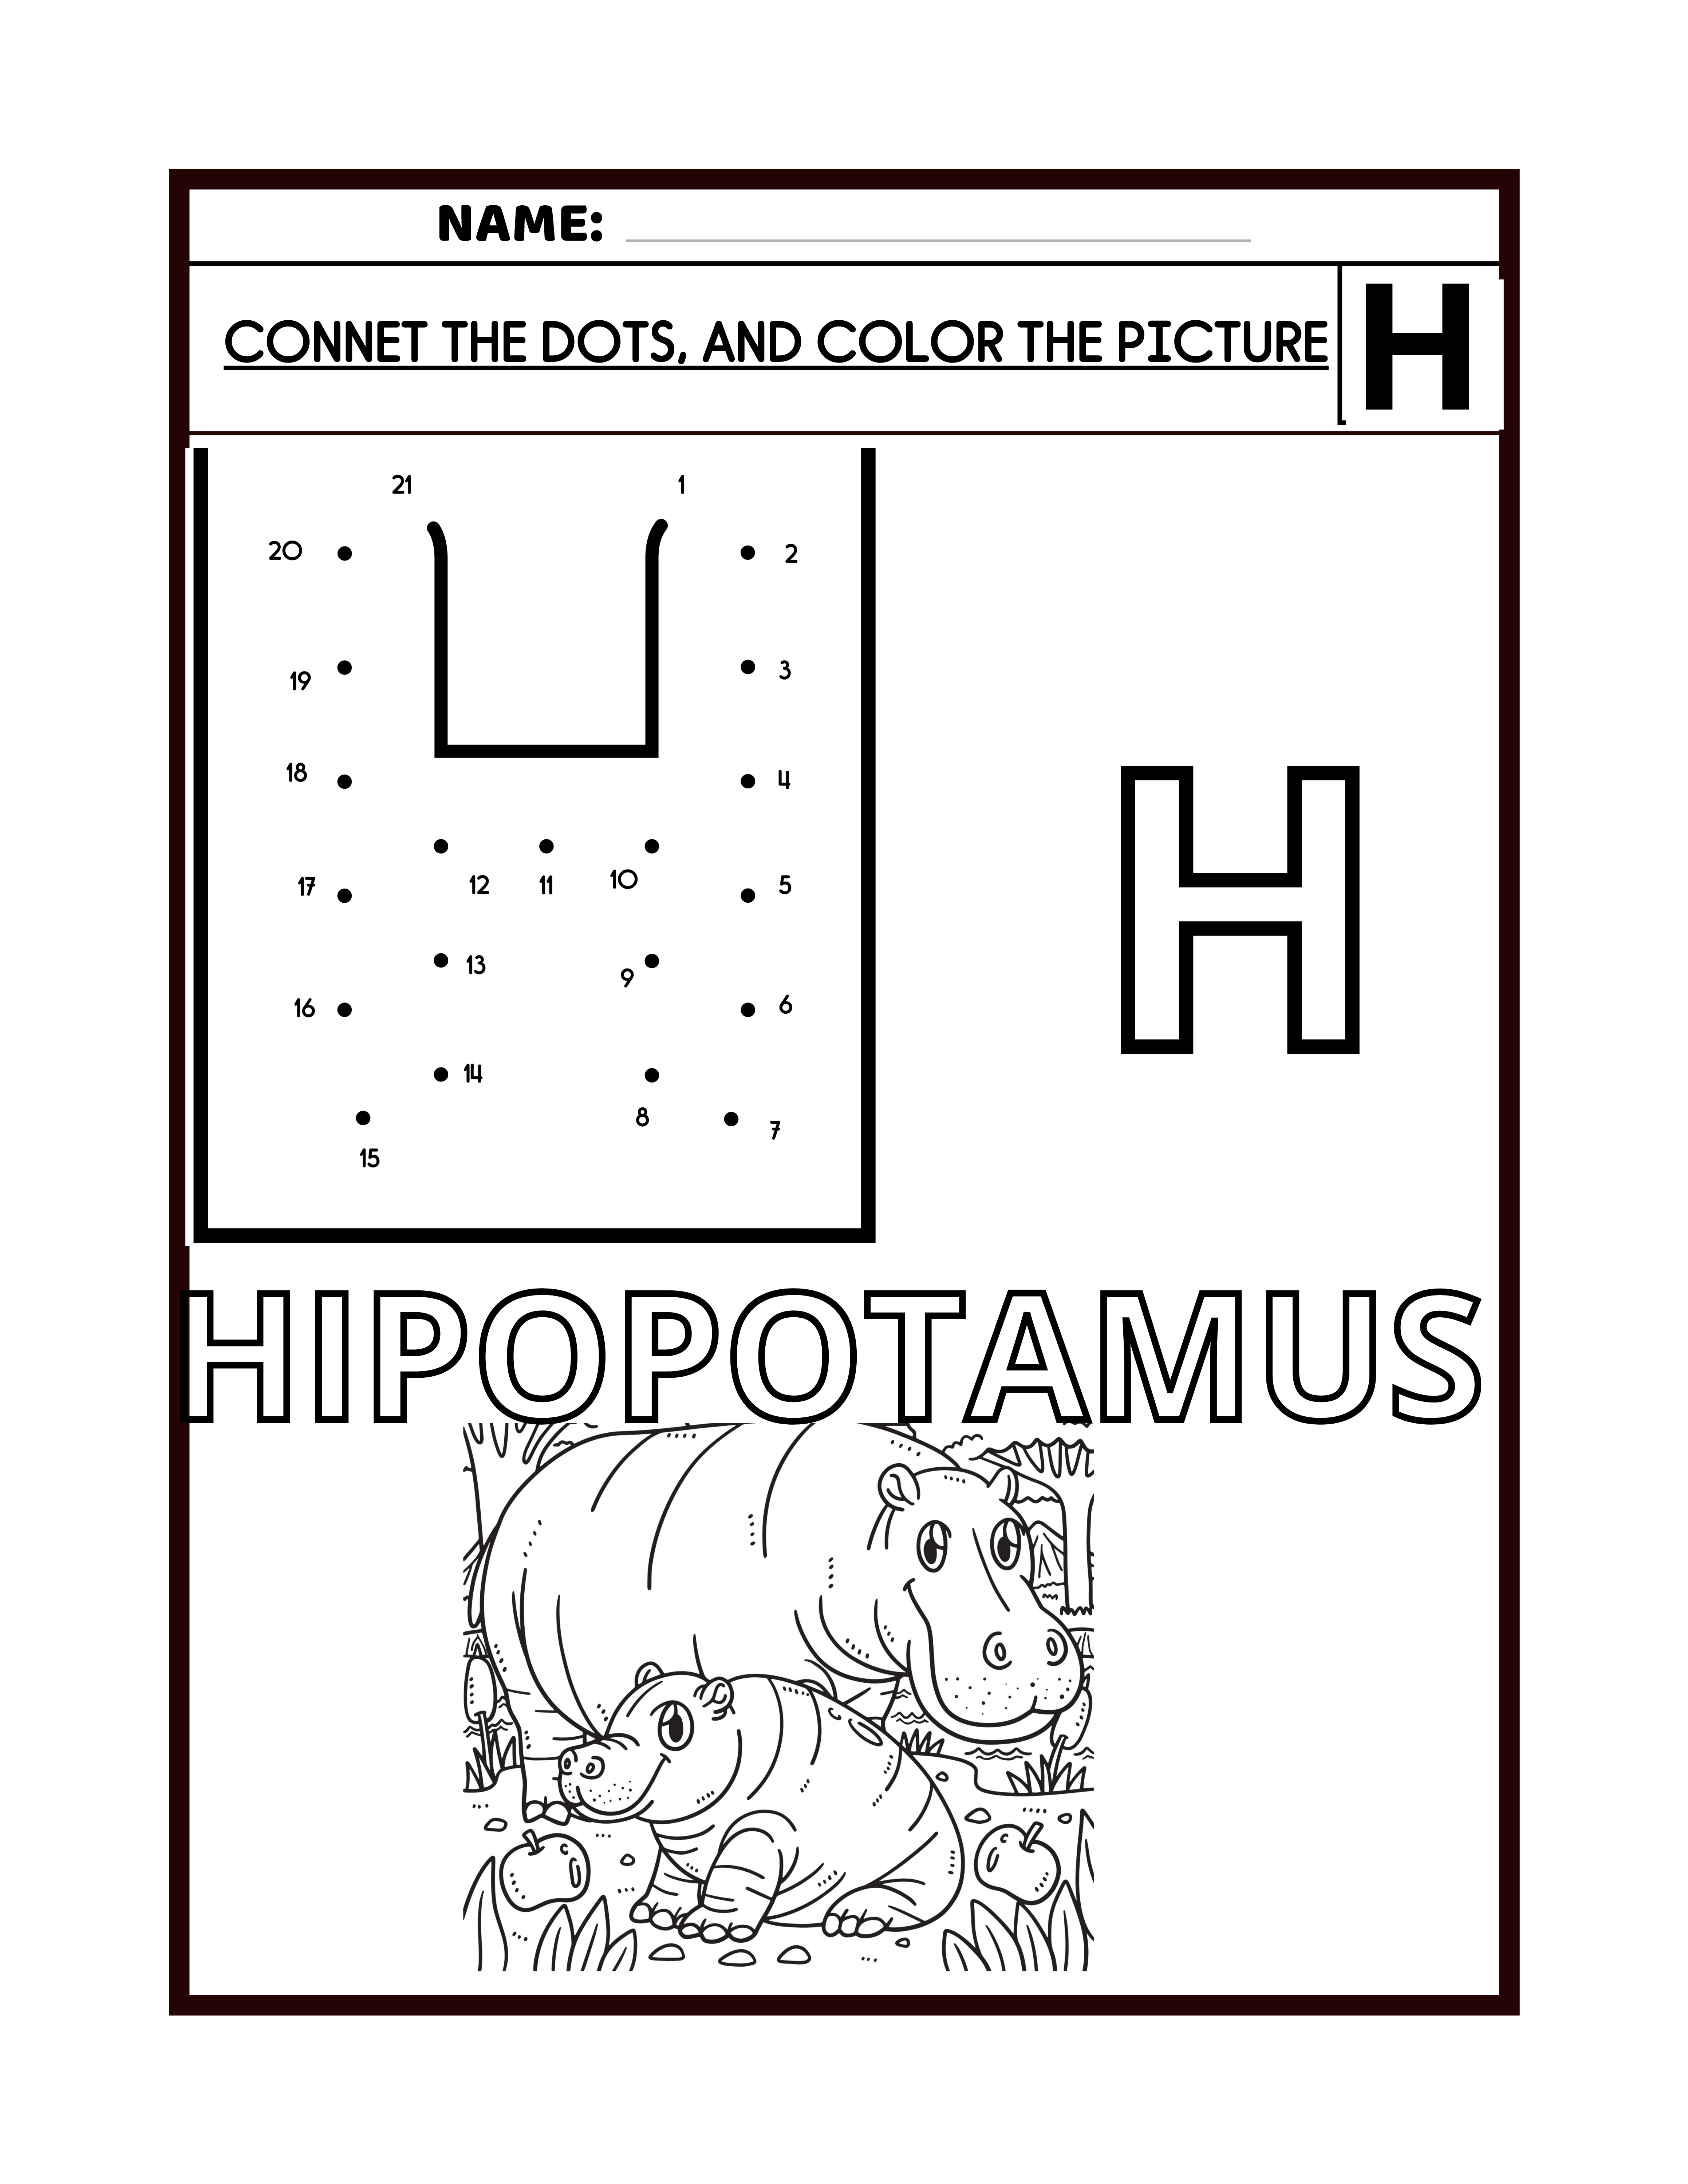 Abcd alphabet dot to dot tracing and coloring pages made by teachers